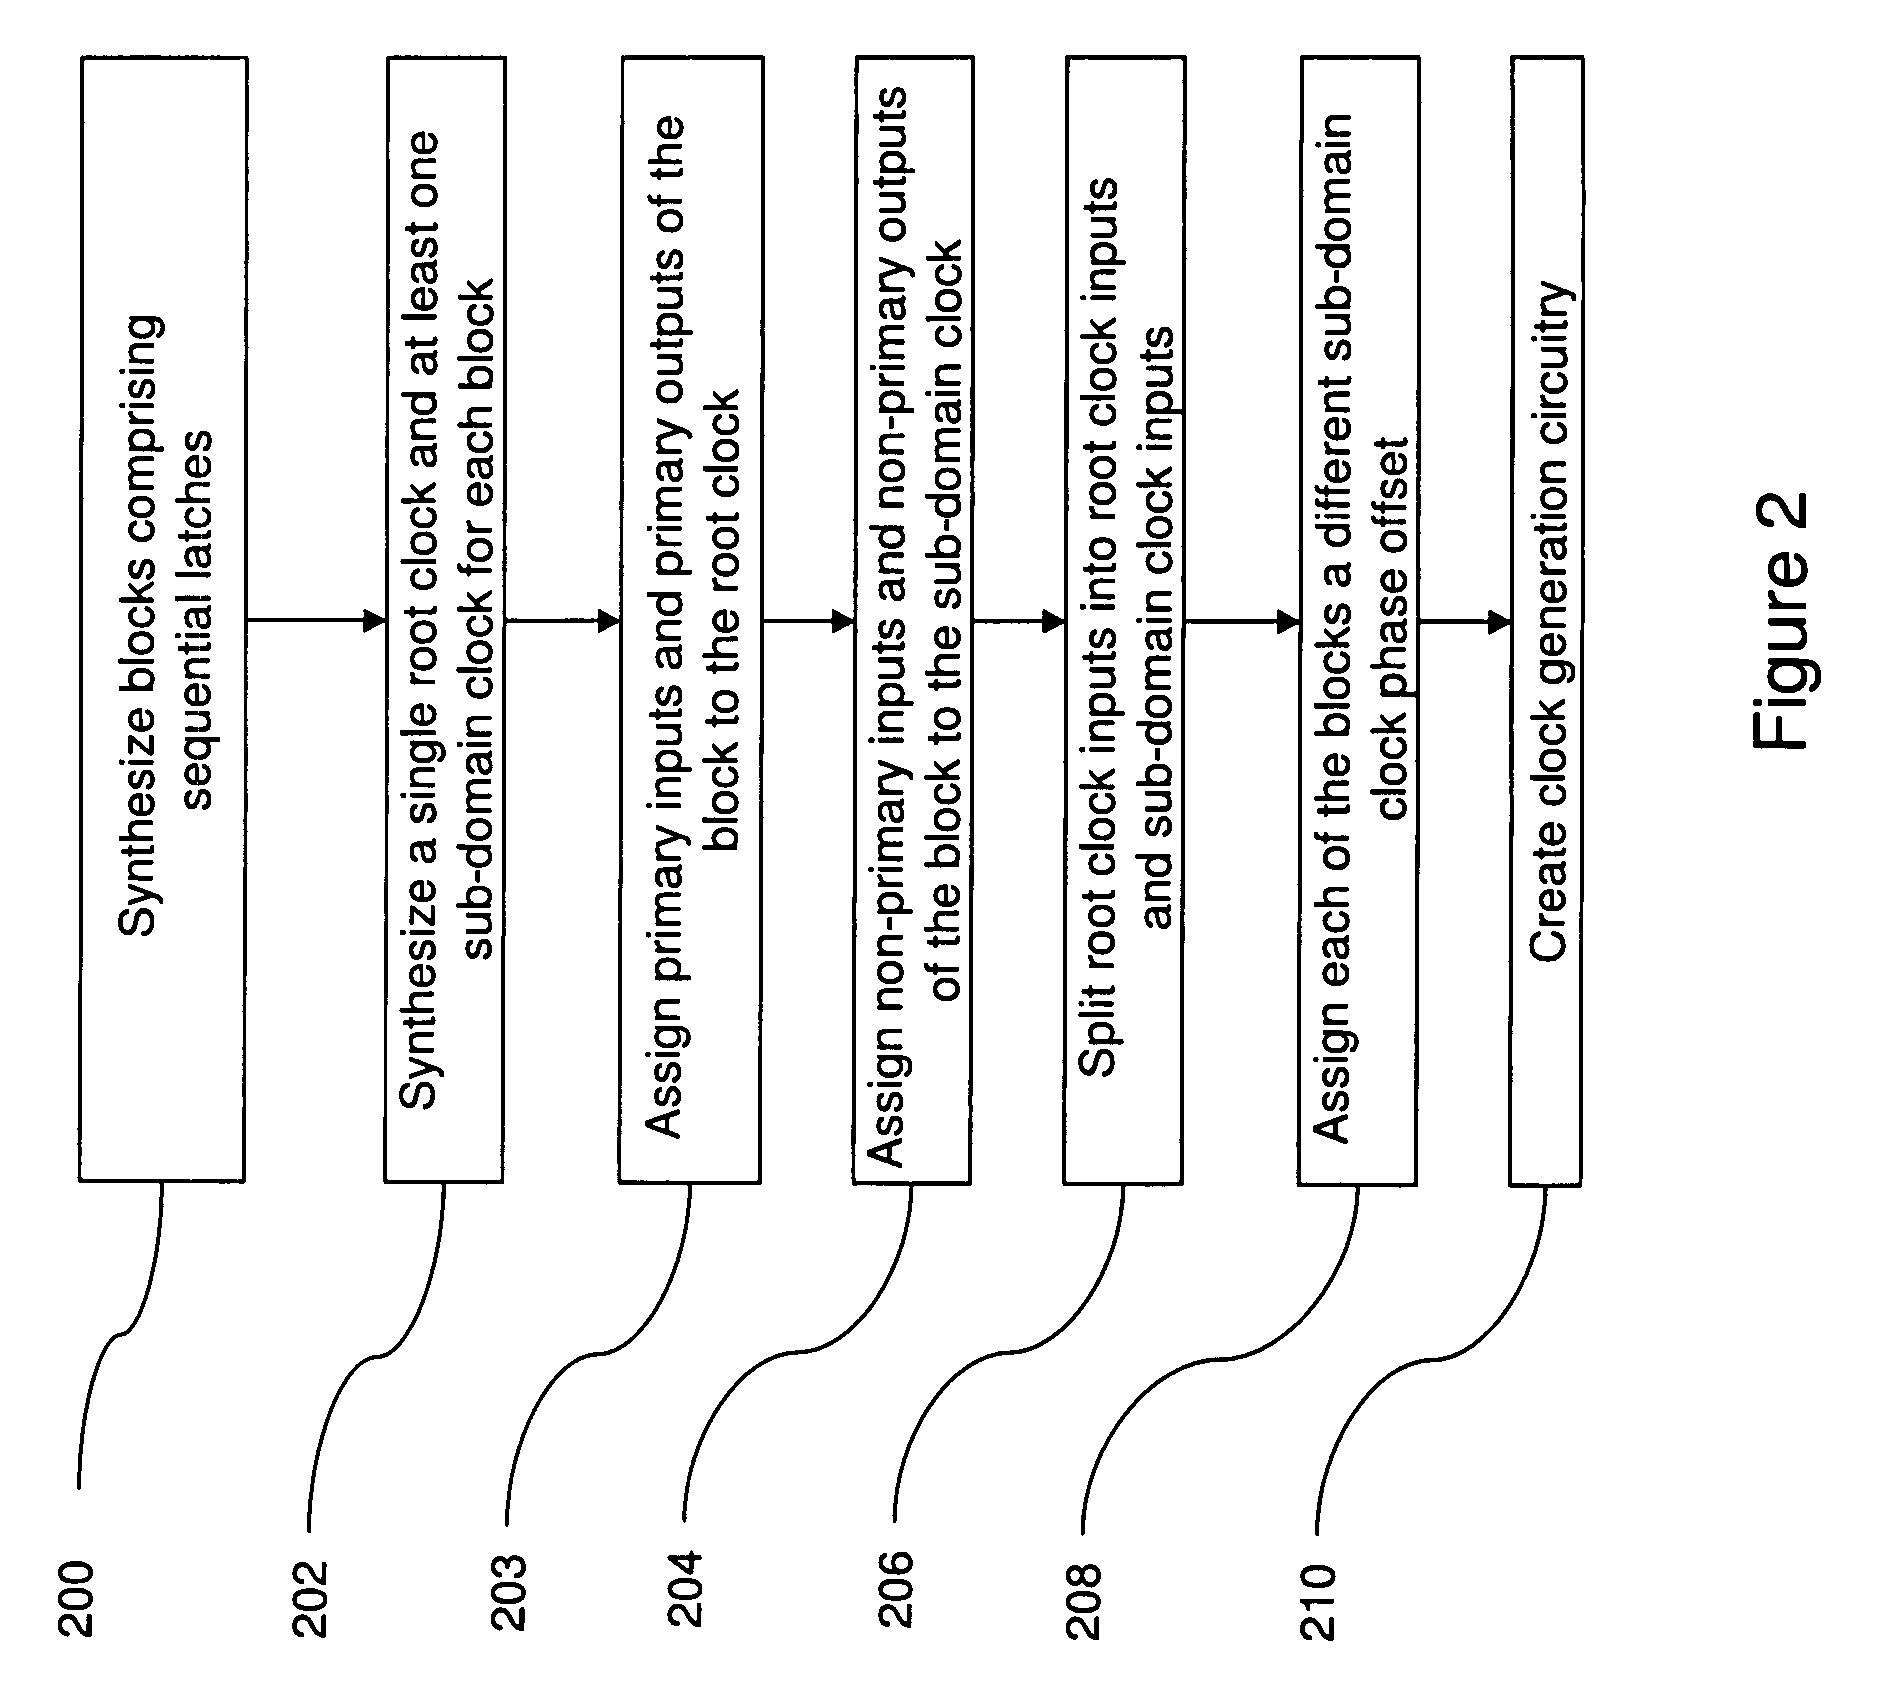 Transition balancing for noise reduction/Di/Dt reduction during design, synthesis, and physical design